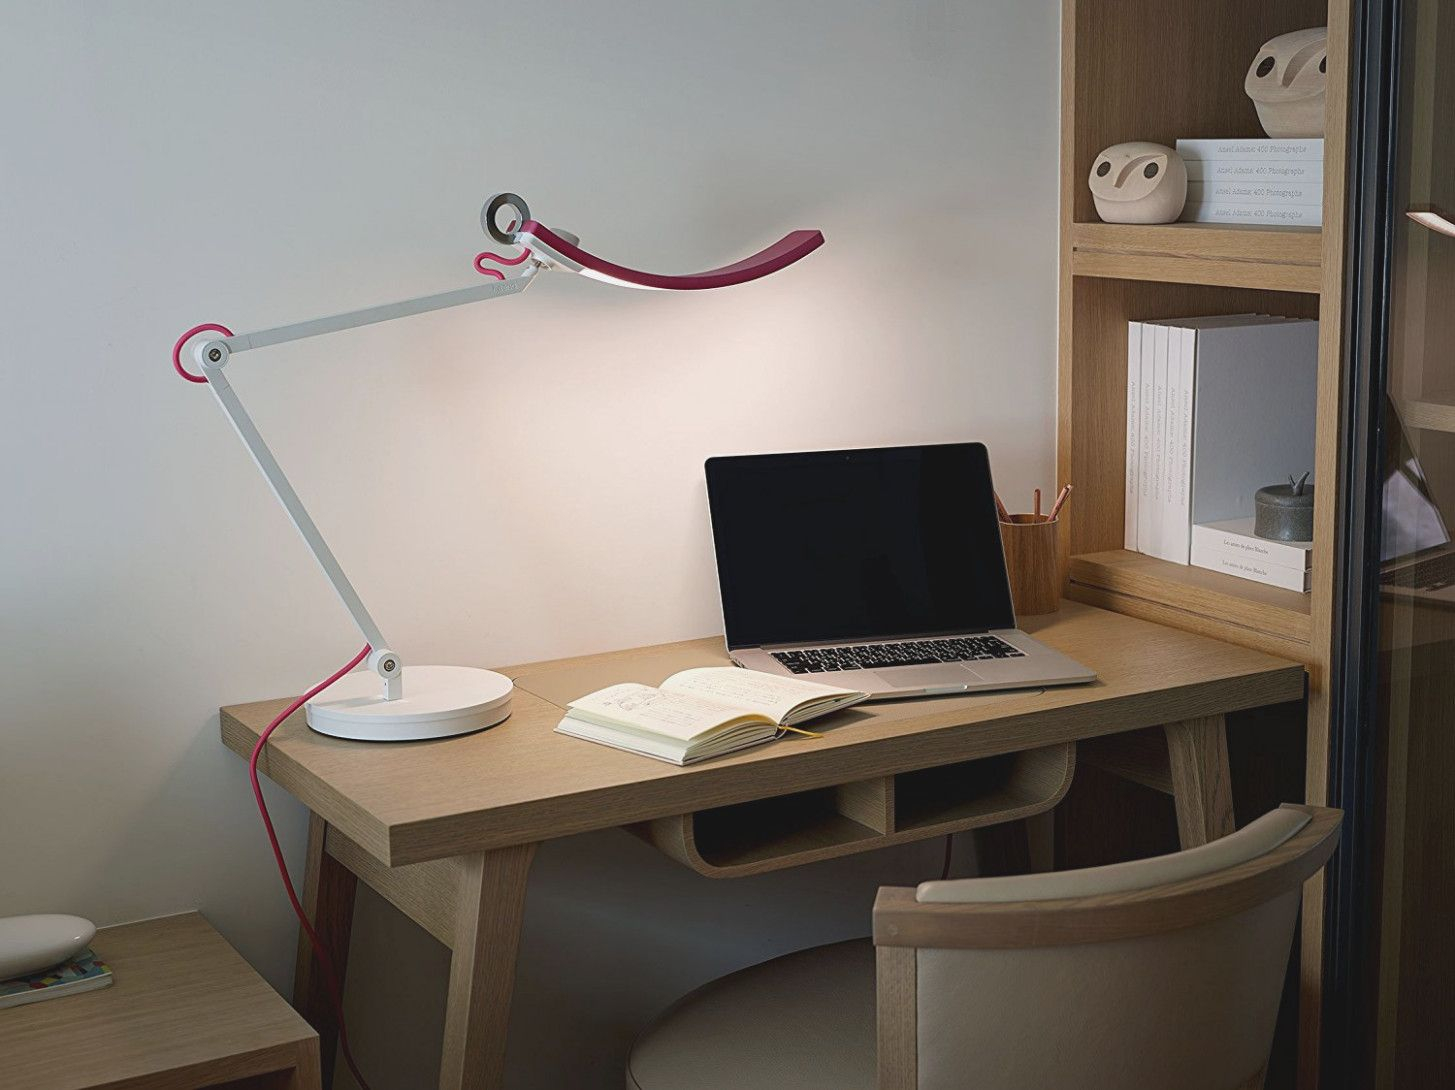 Best Desk Light For Studying Dimmable Led Desk Lamps for size 1455 X 1090